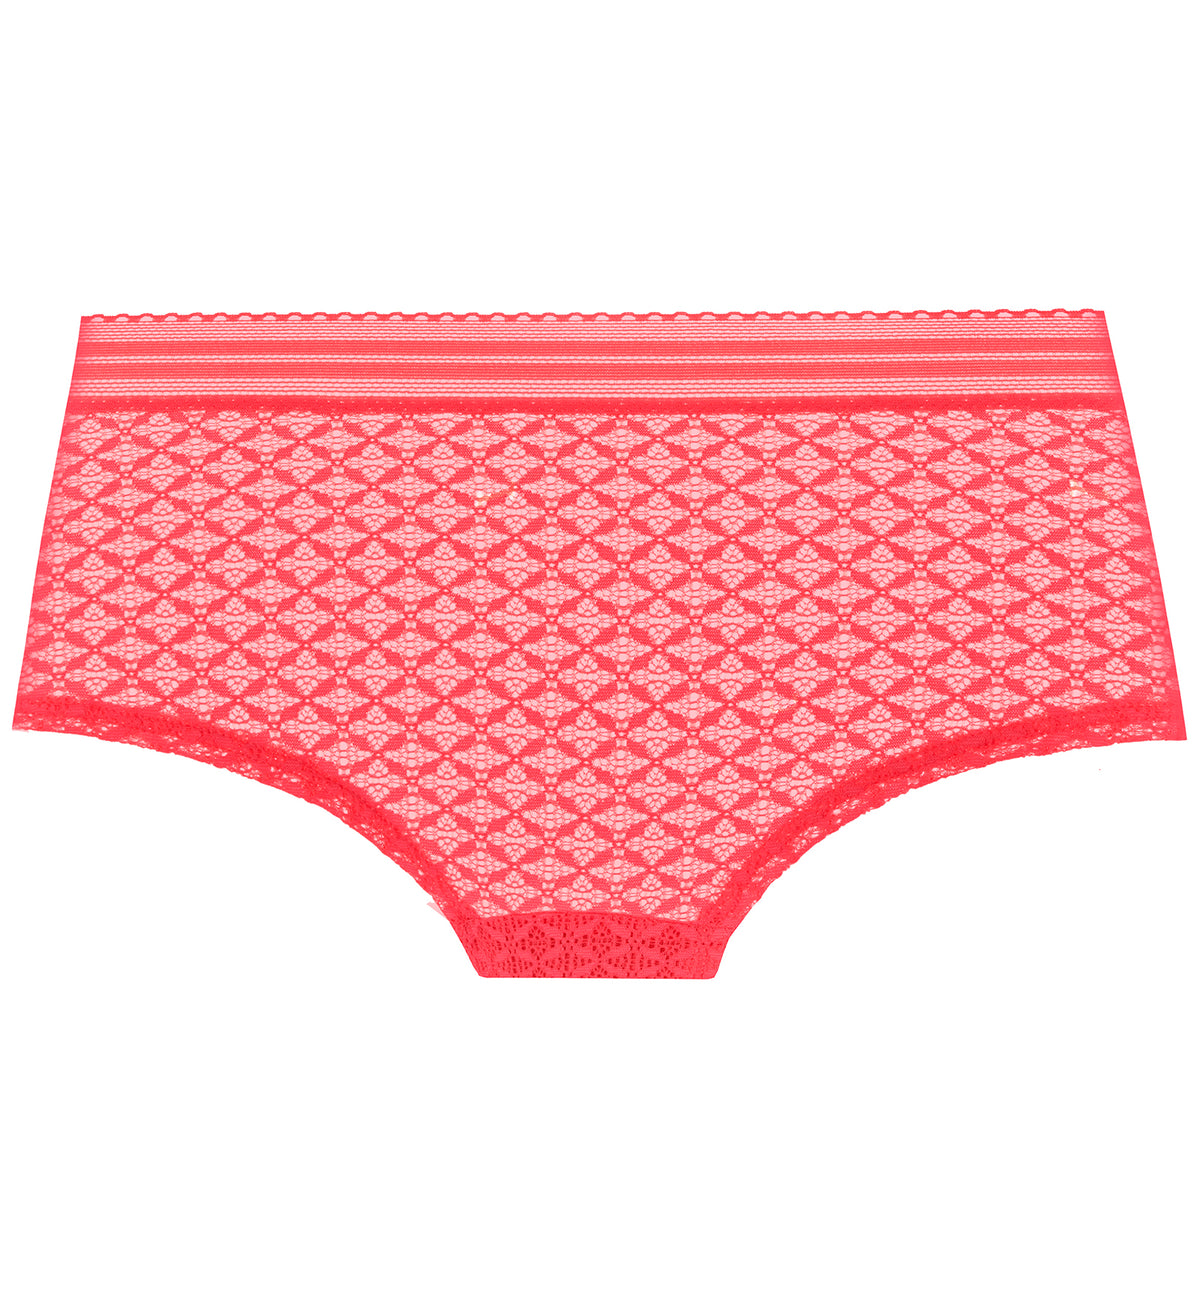 Freya Viva Matching Short (5646),XS,Sunkissed Coral - Sunkissed Coral,XS